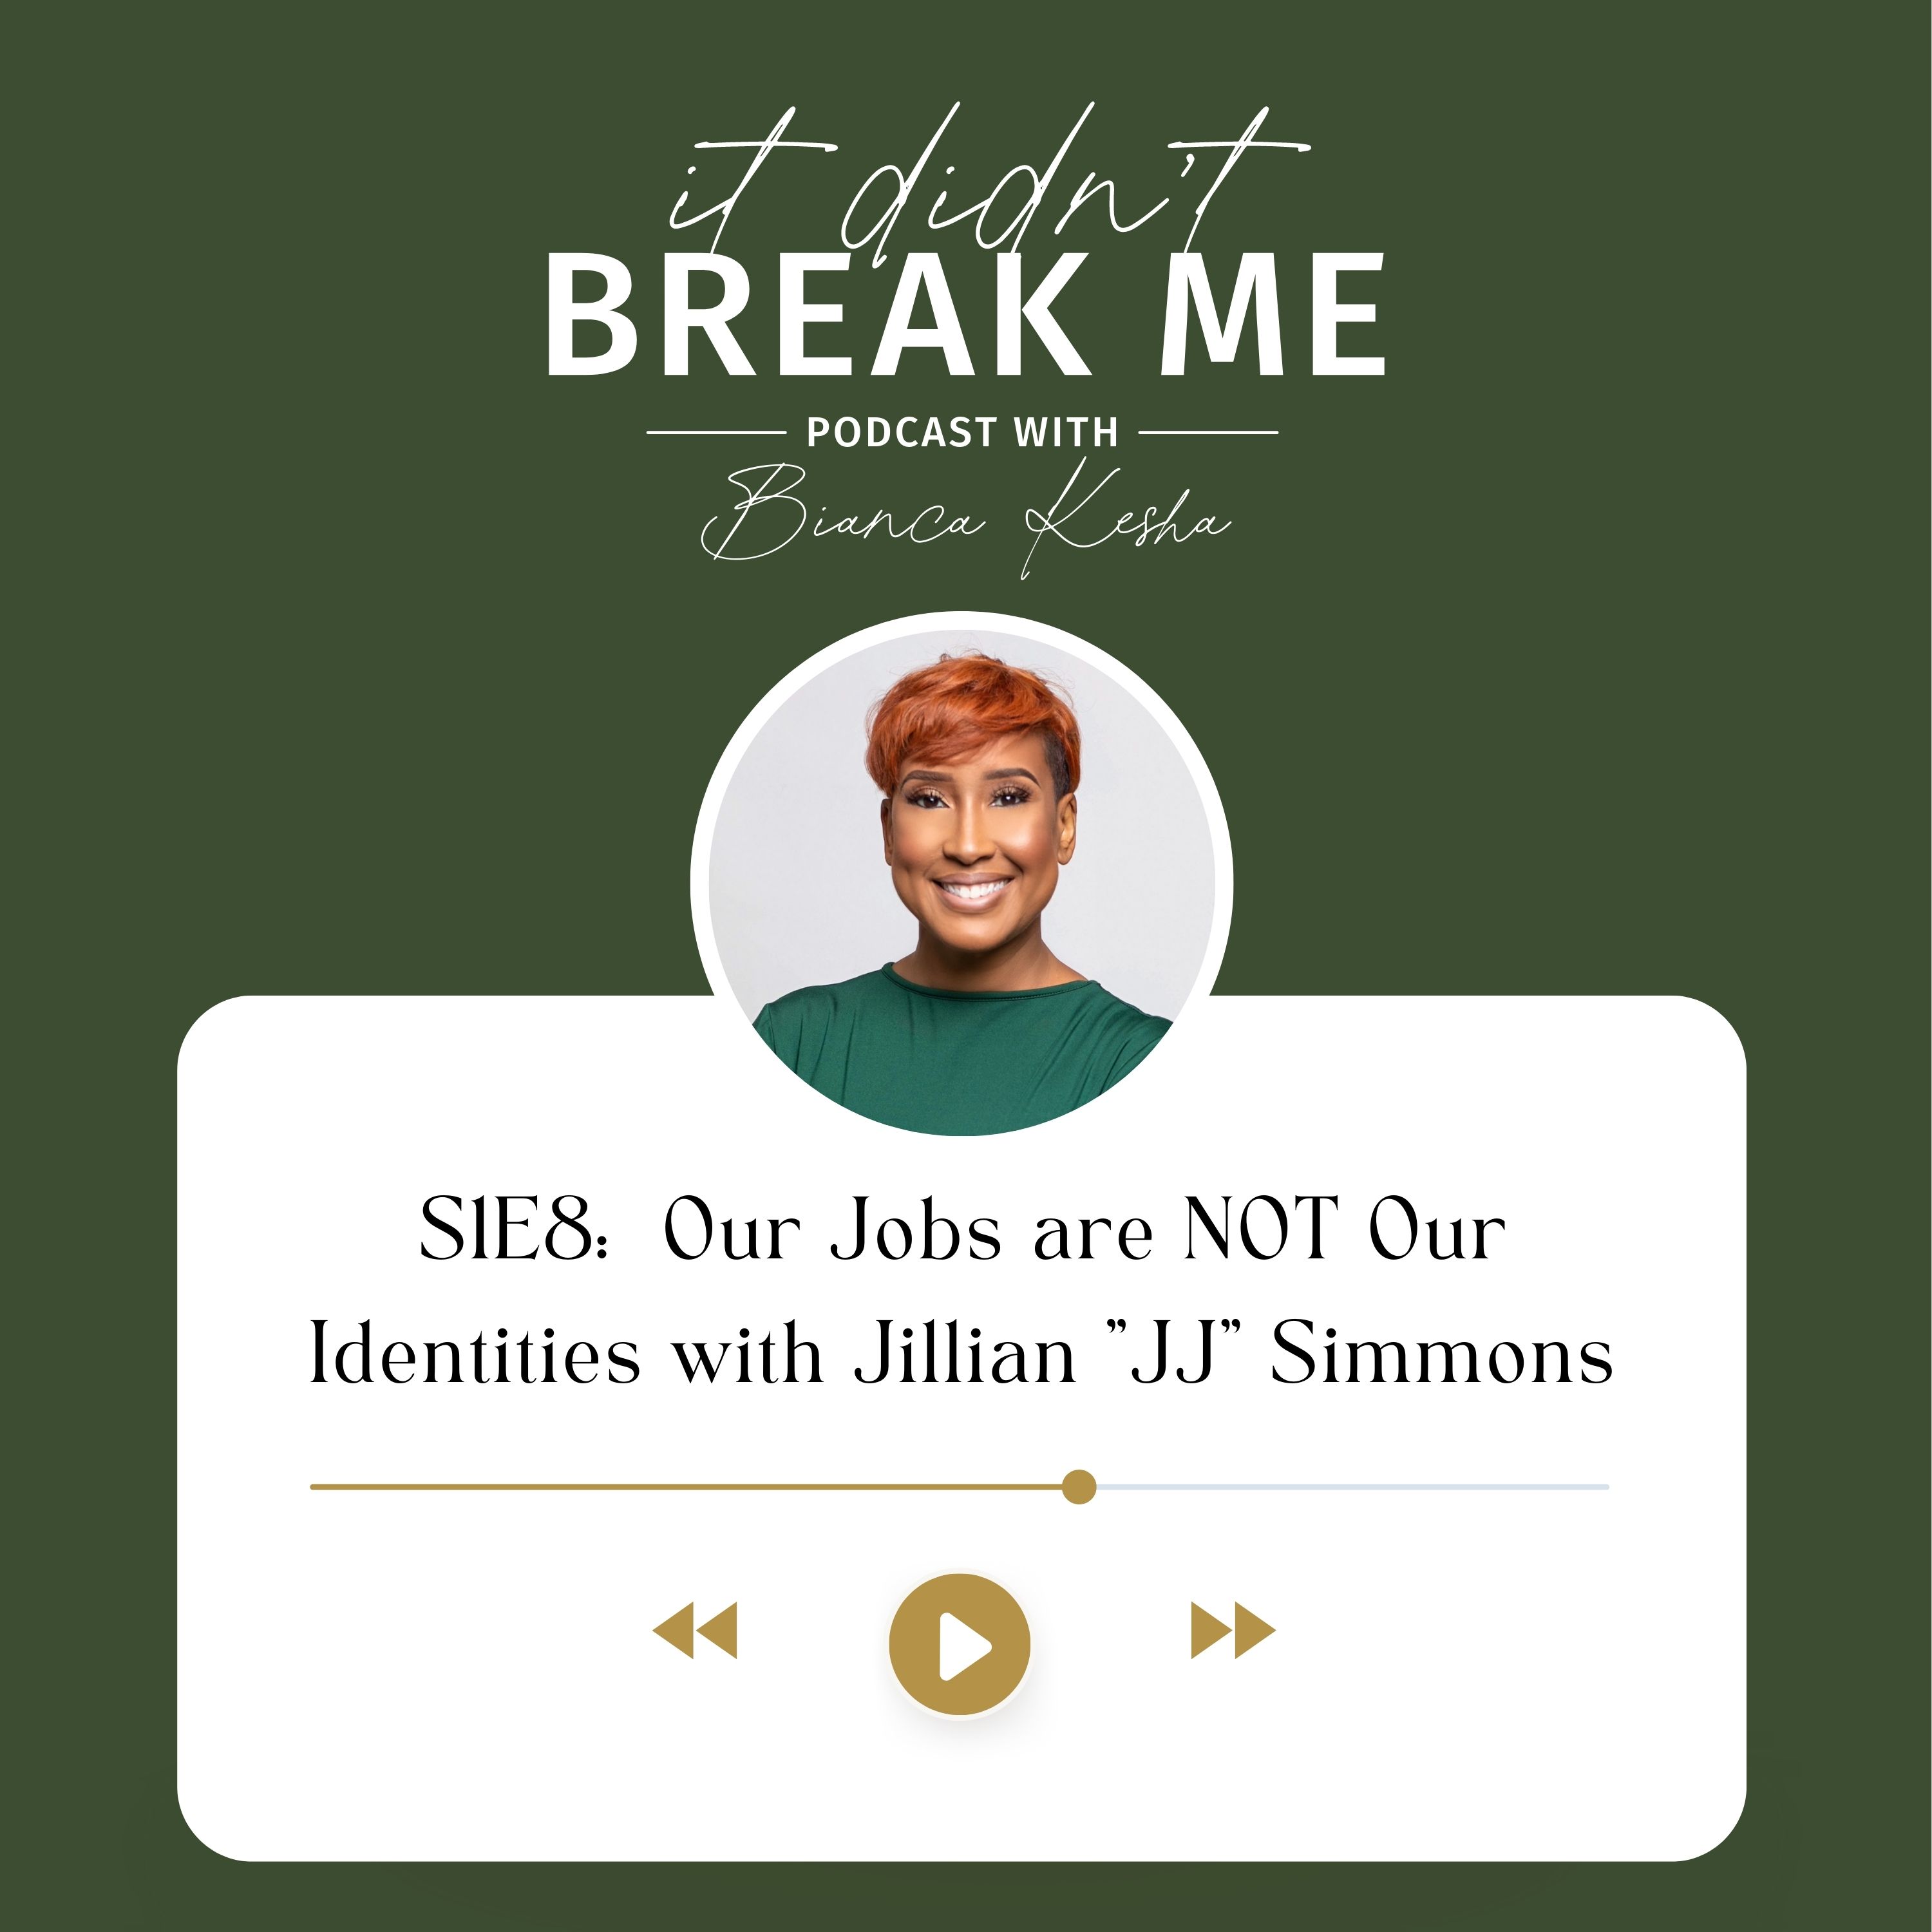 Our Jobs are NOT Our Identities with Jillian "JJ" Simmons